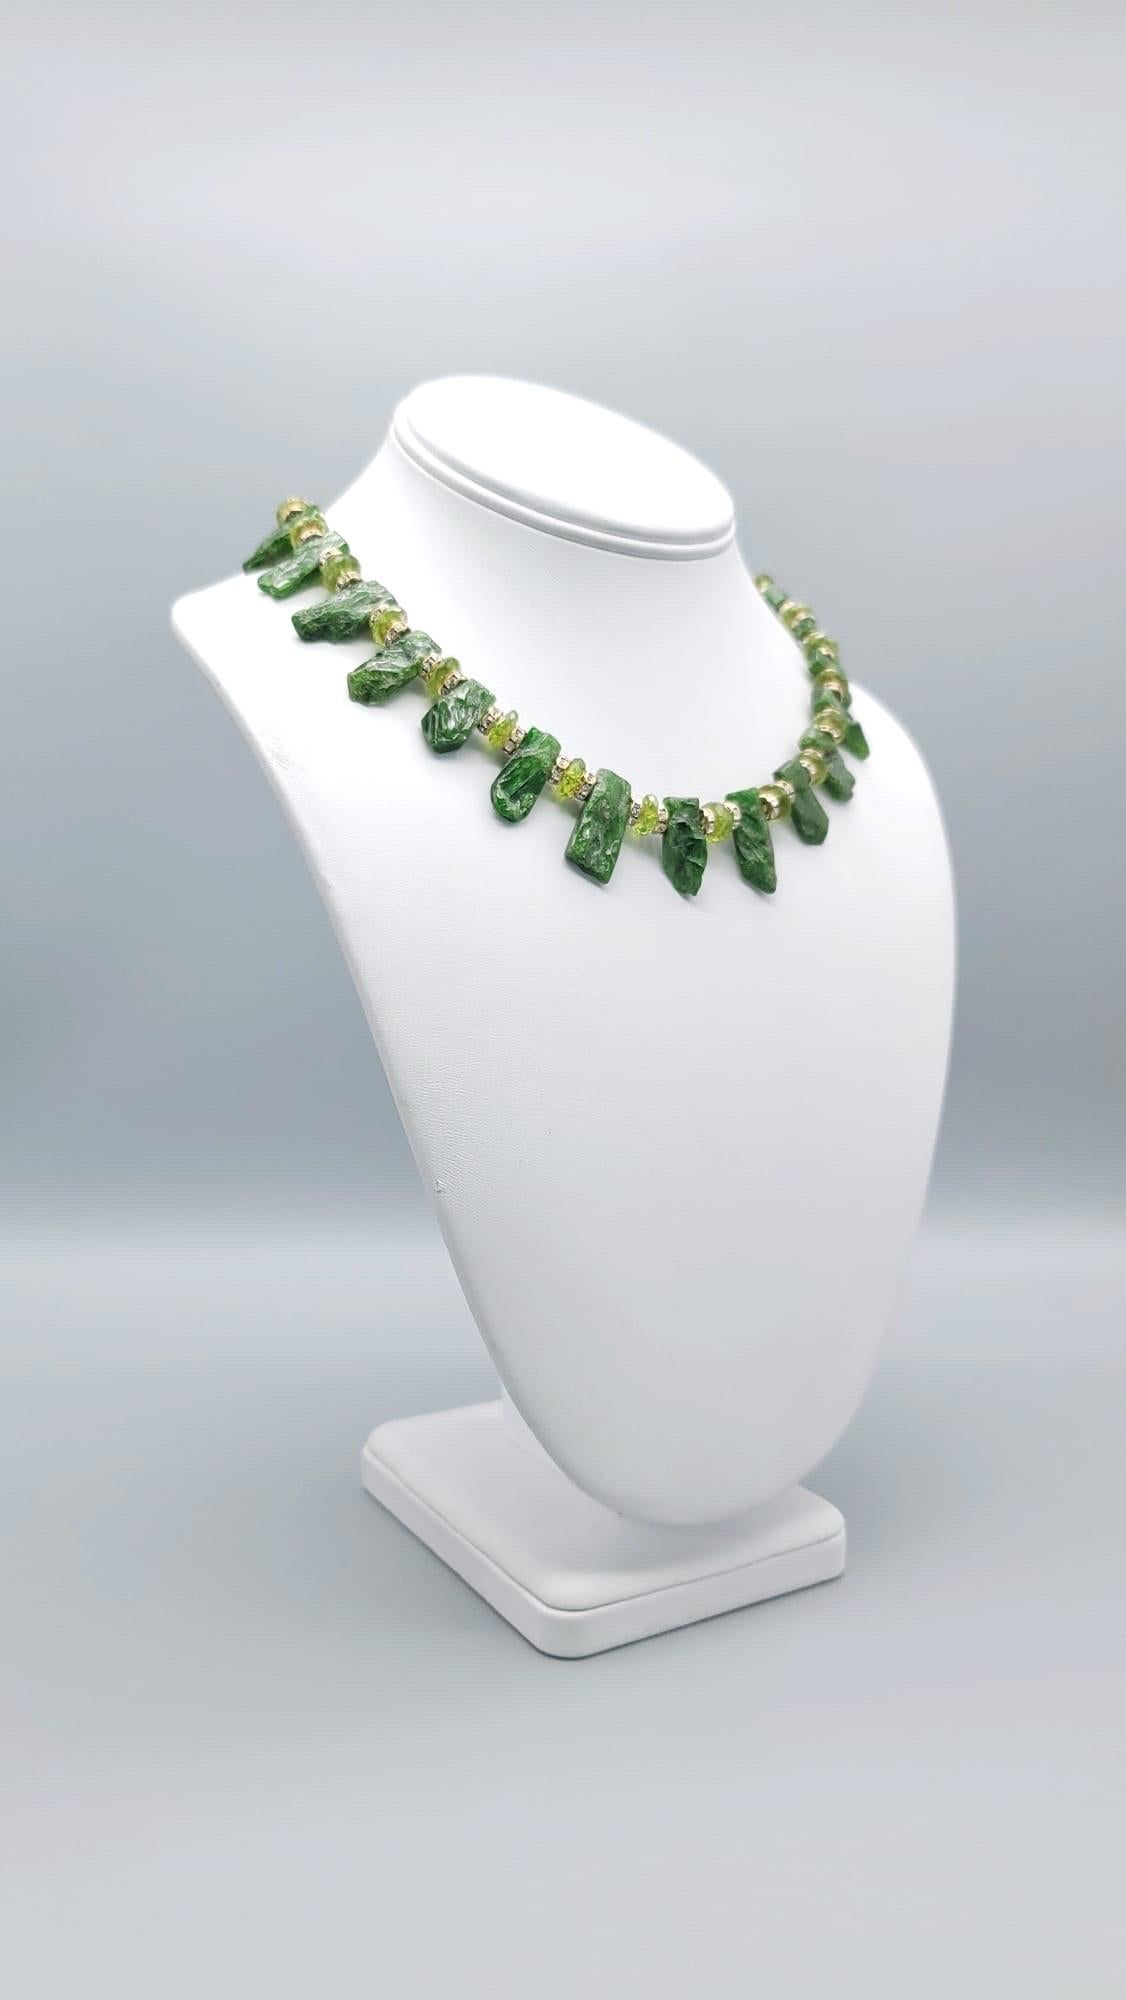 A.Jeschel Gorgeous necklace green Chrome Diopside paired with Peridot  For Sale 7